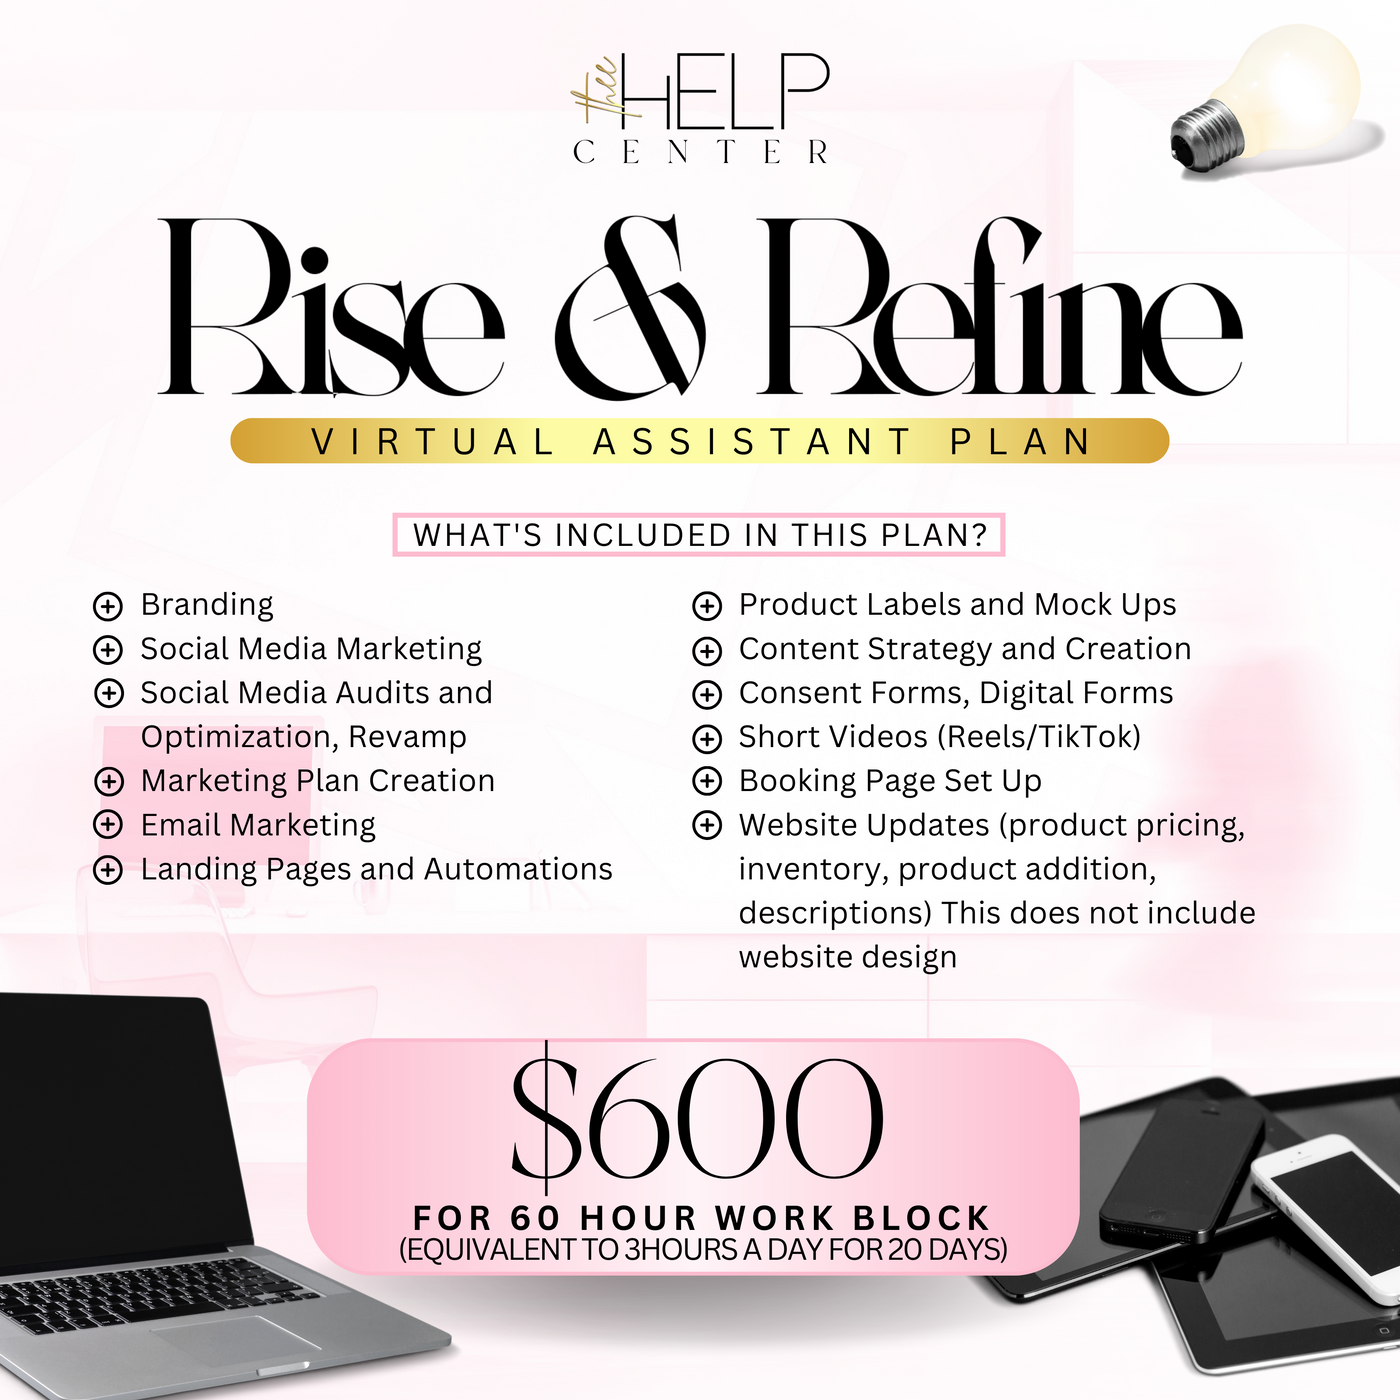 Rise and Refine (Virtual Assistant Plan) 60hr Work Block